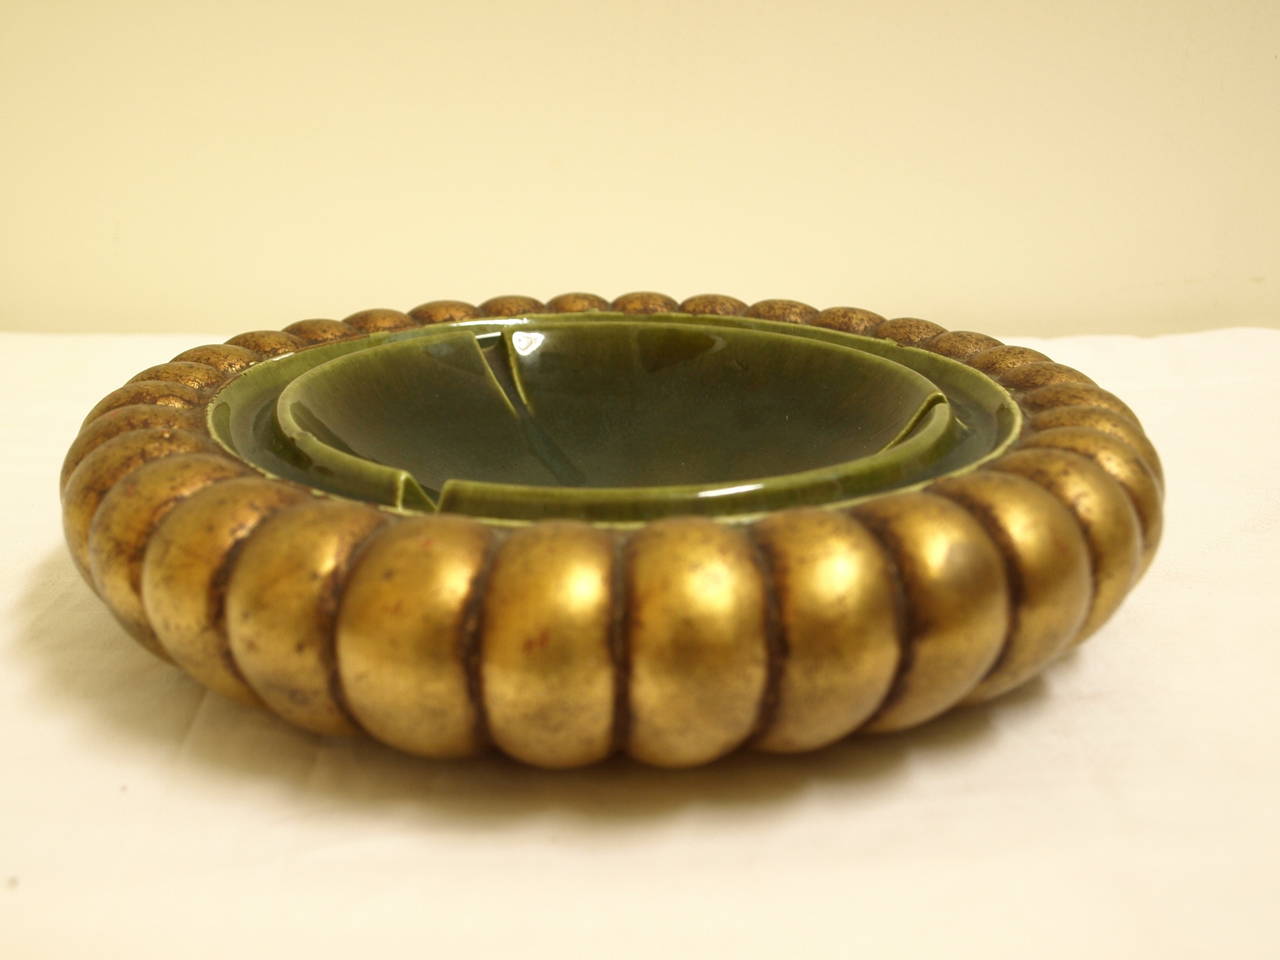 Amazing large mid century ashtray. Signed by the artist and numbered. In gold leaf with patina shown.